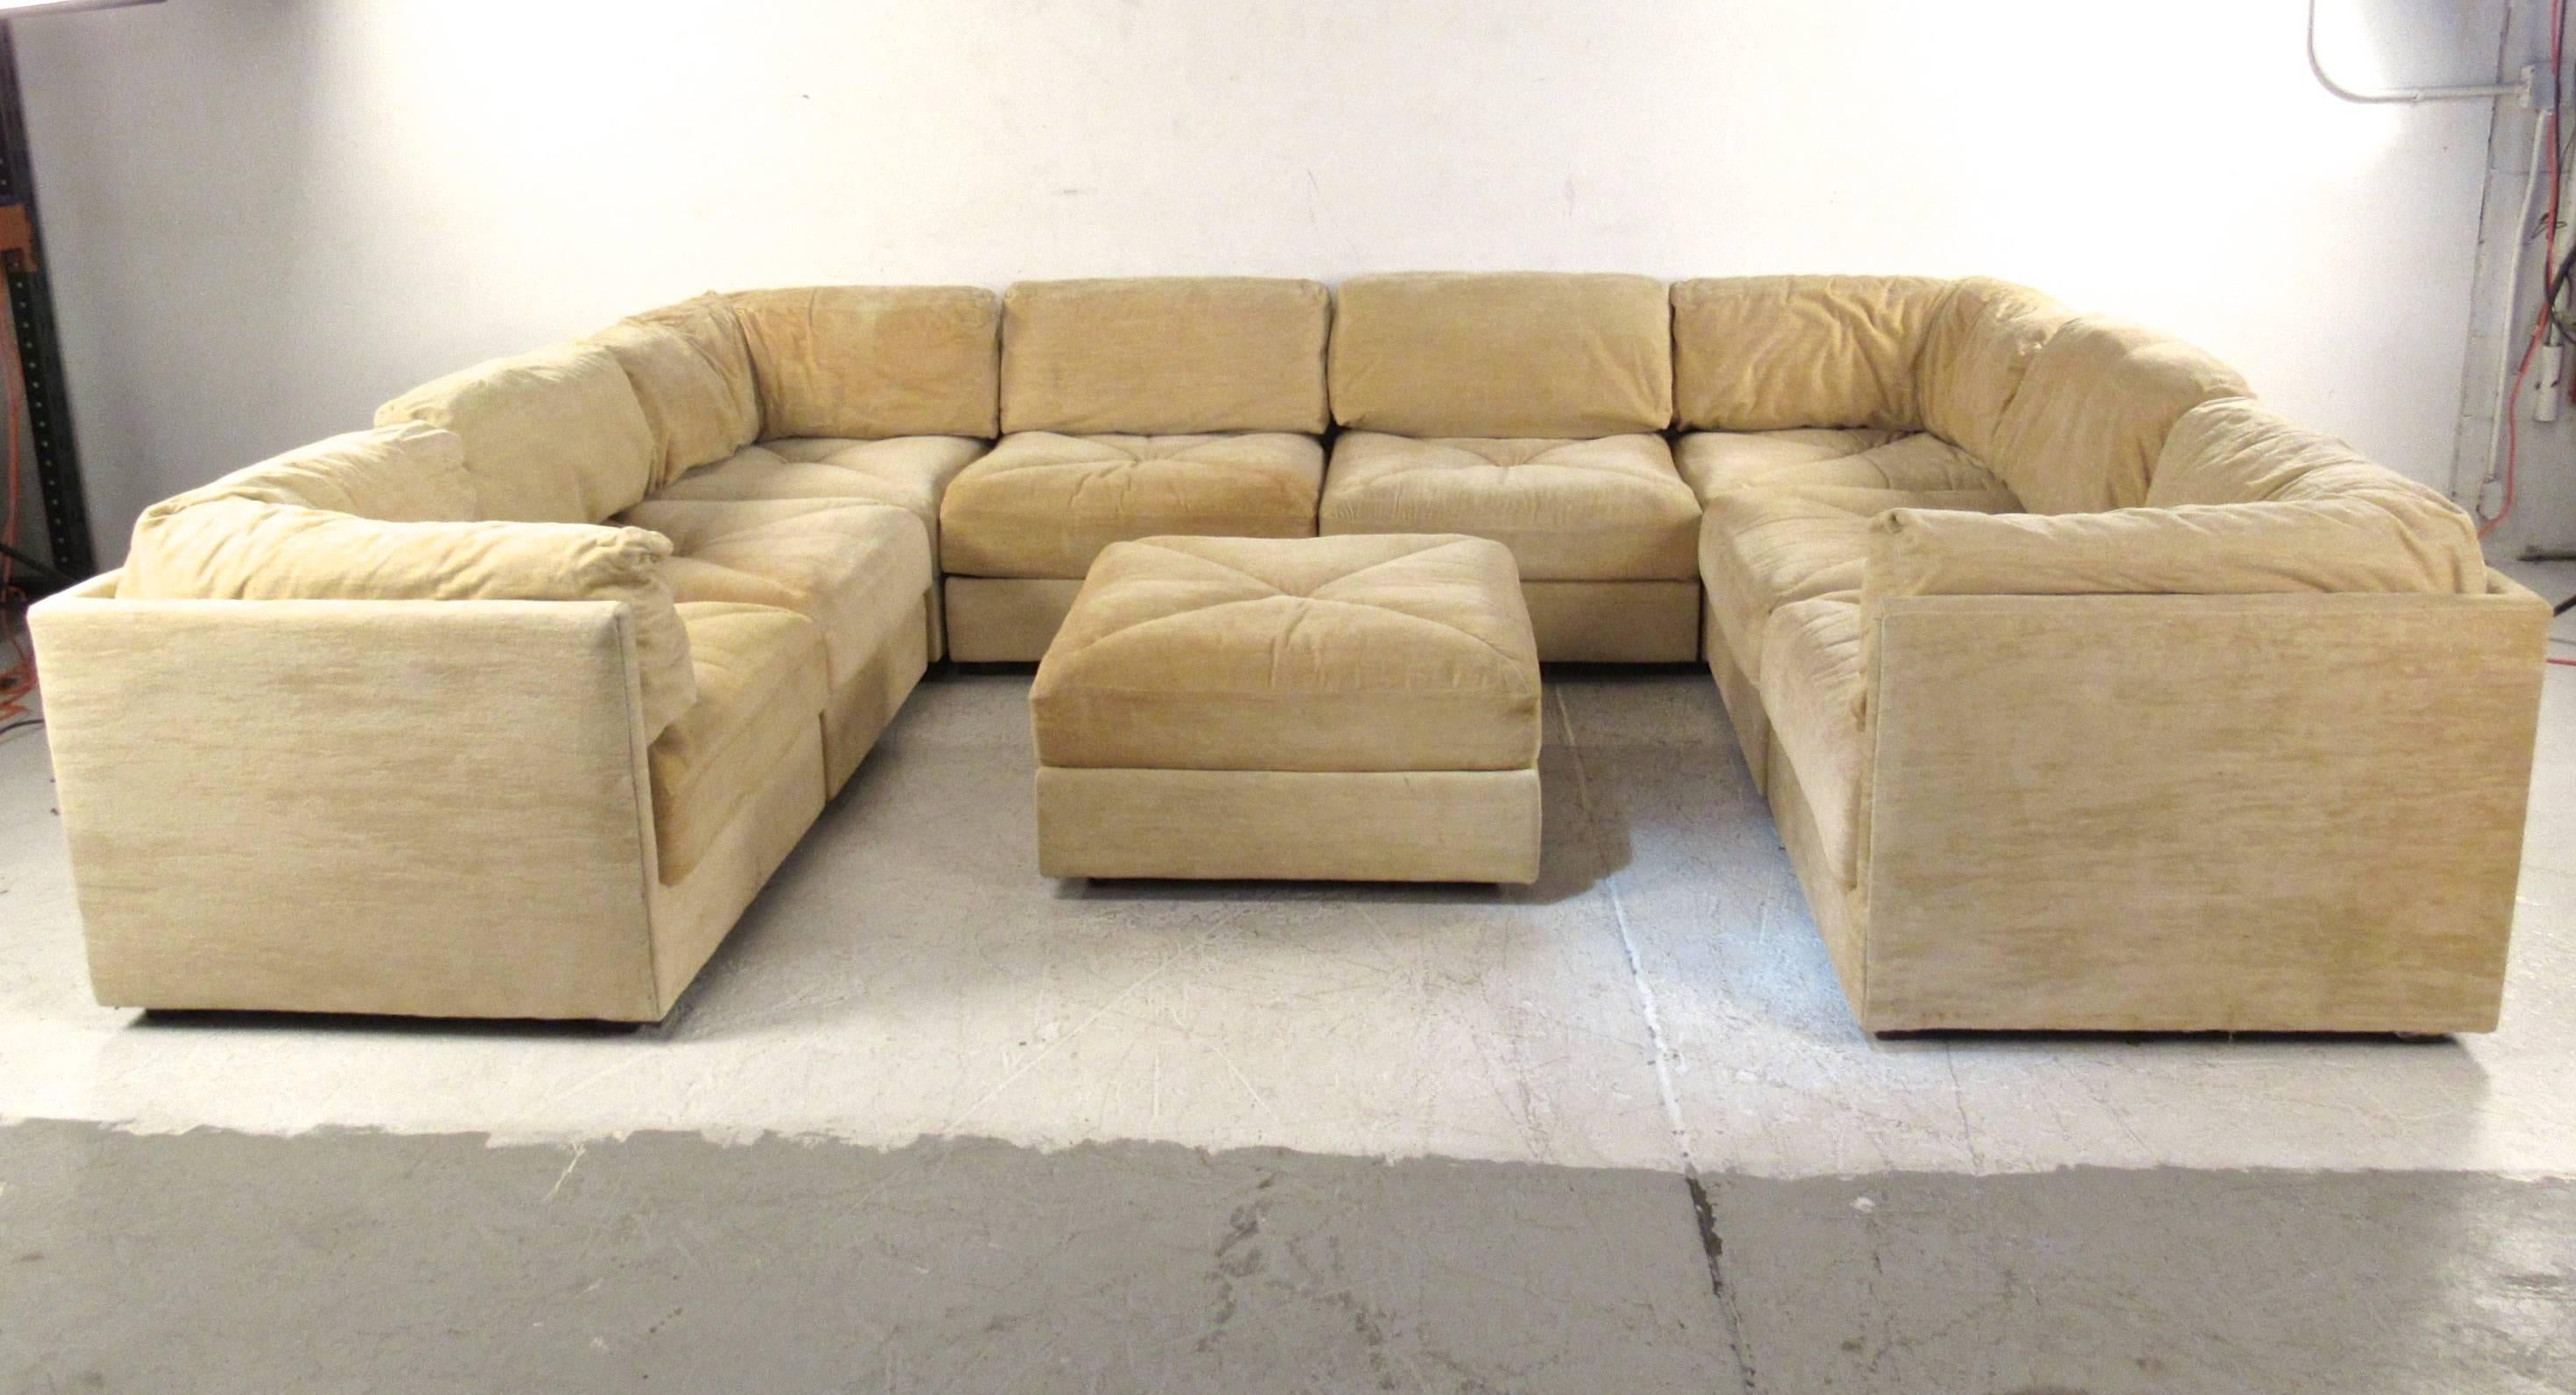 This impressive nine-piece mid-century modern sectional sofa by Selig Furniture offers an expansive seating arrangement. Large ottoman included, makes a substantial addition to home or business.  Combining vintage style with comfort and